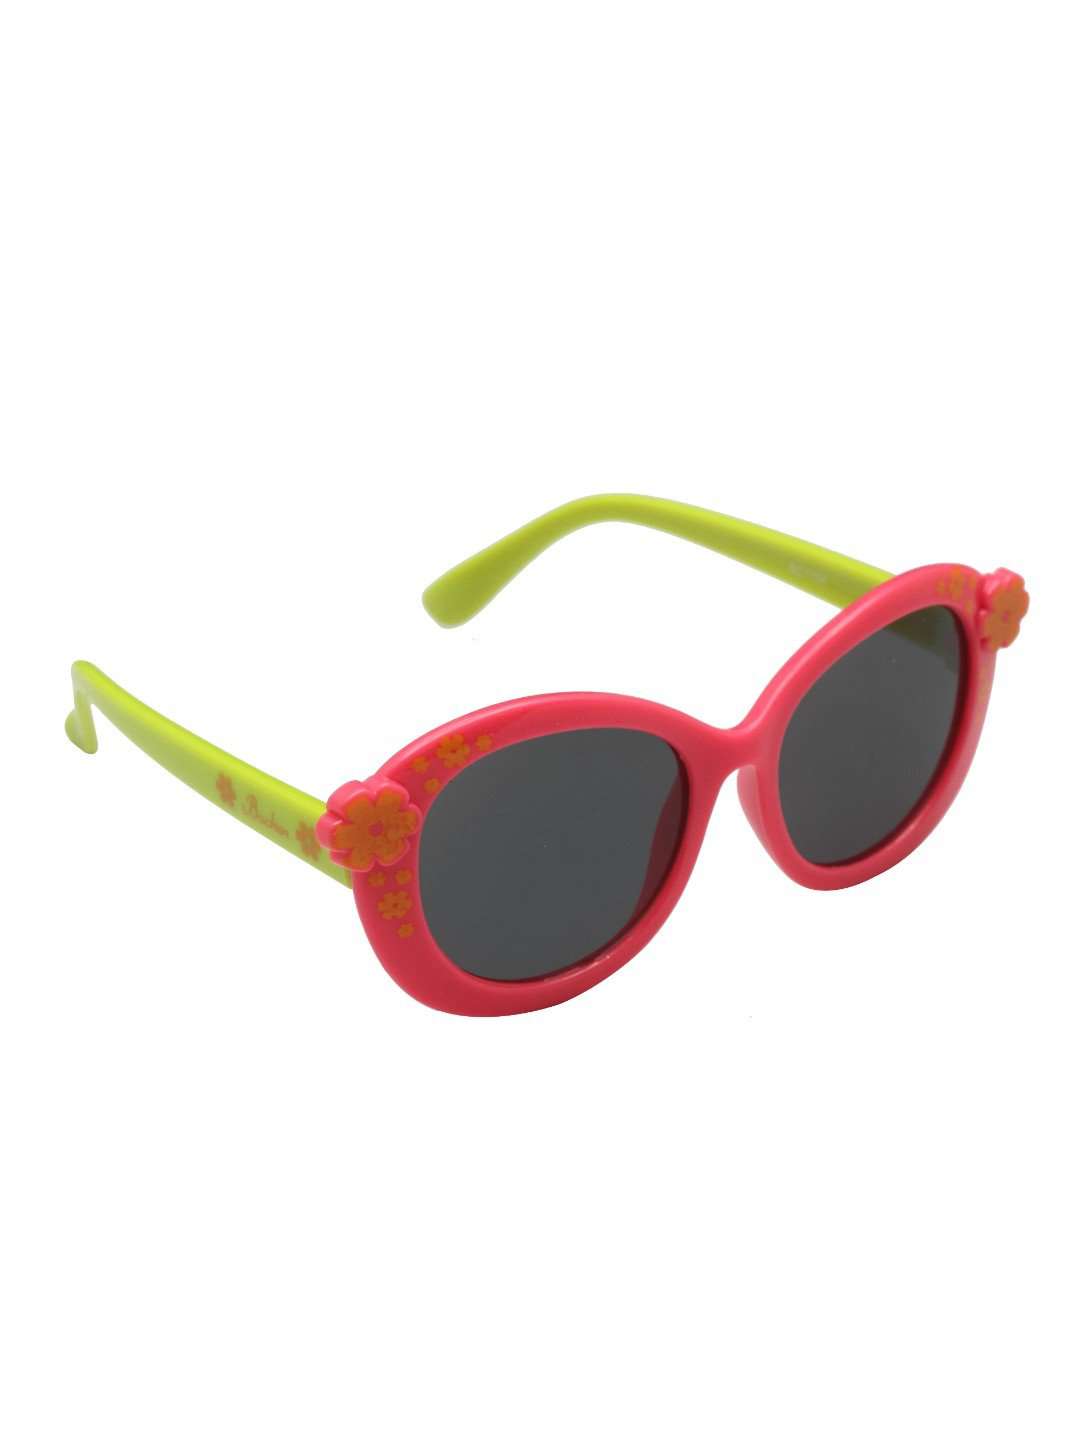 Stol'n Kids Pink and Green Flower Oval Sunglasses - SWHF